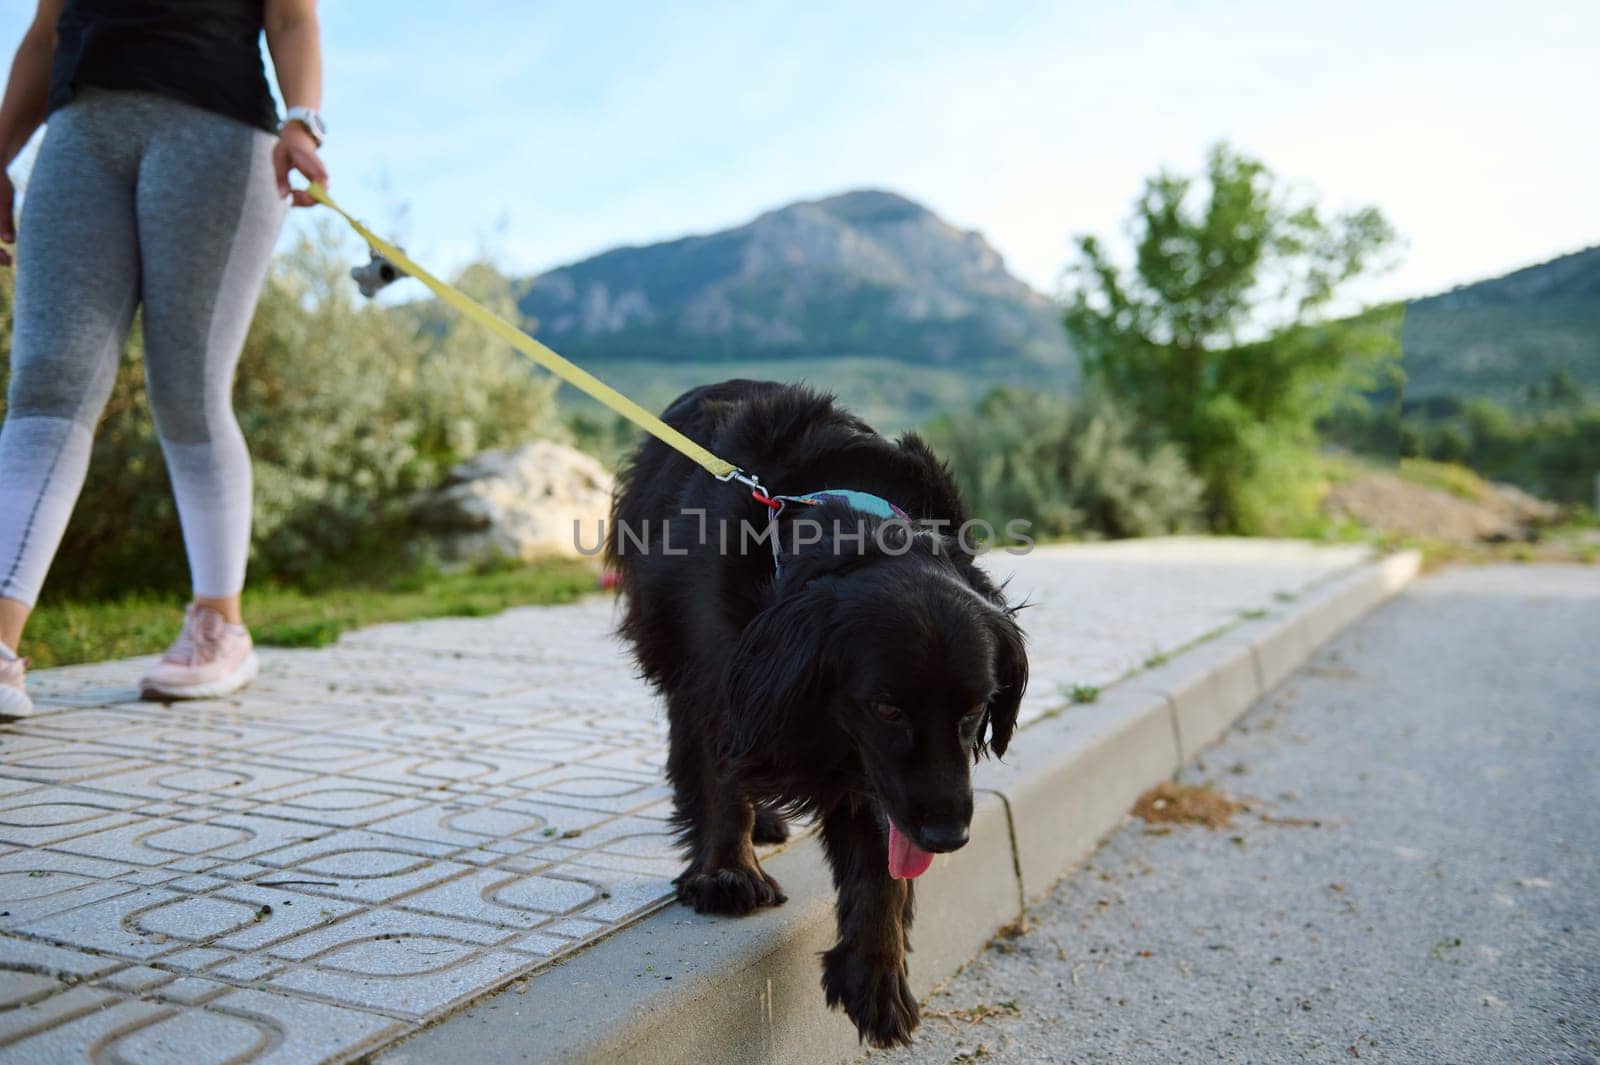 Focus on a beautiful purebred pedigree black cocker spaniel dog pet being walked on leash outdoors, against mountains nature background